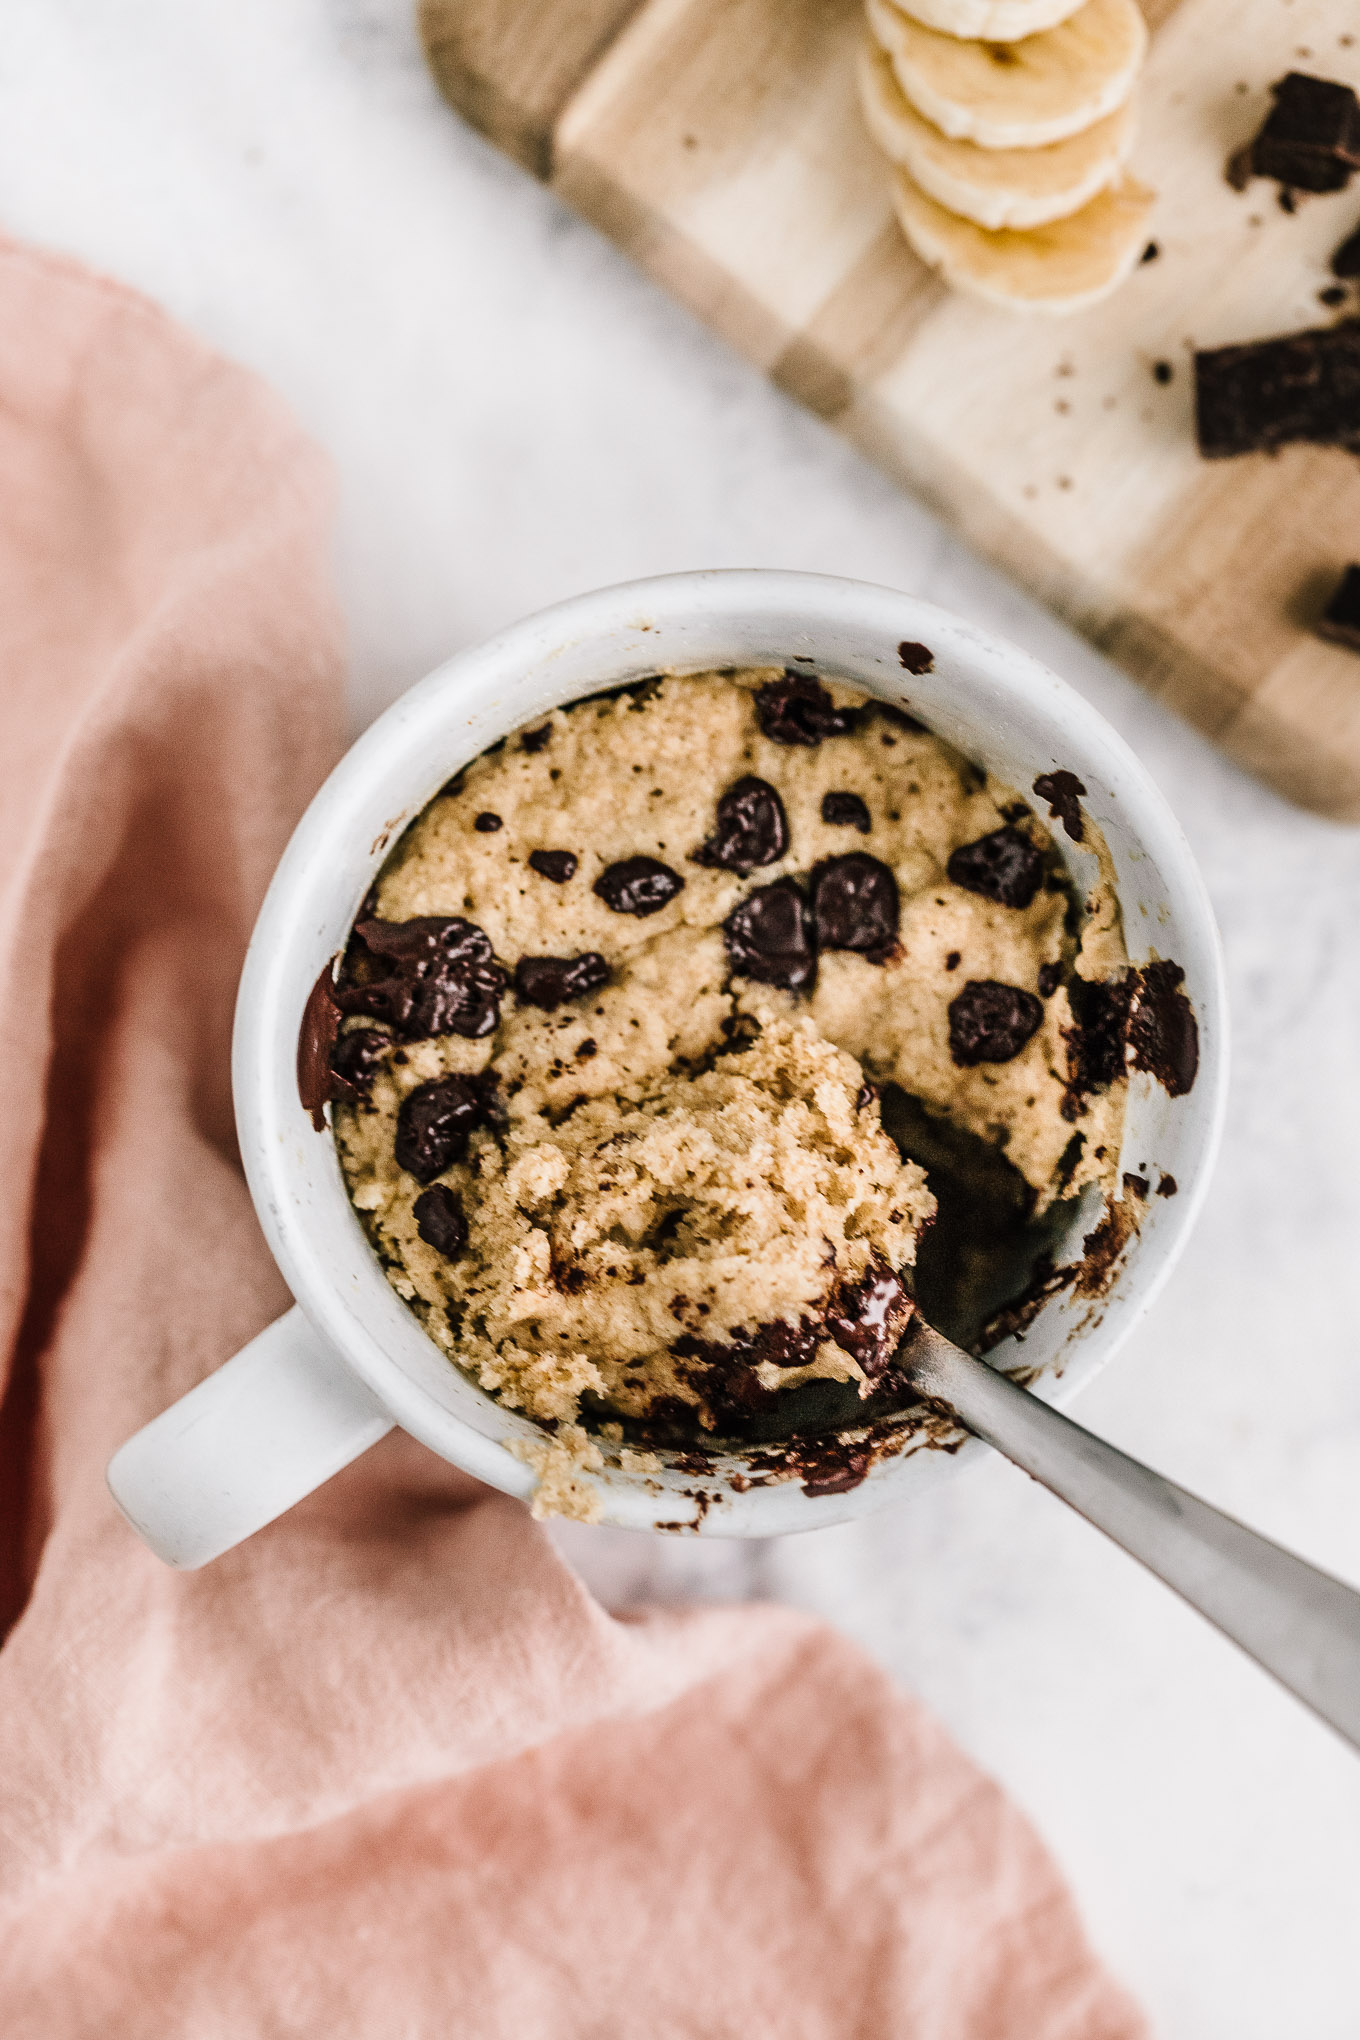 spoon scooping out vegan banana bread mug cake with chocolate chips